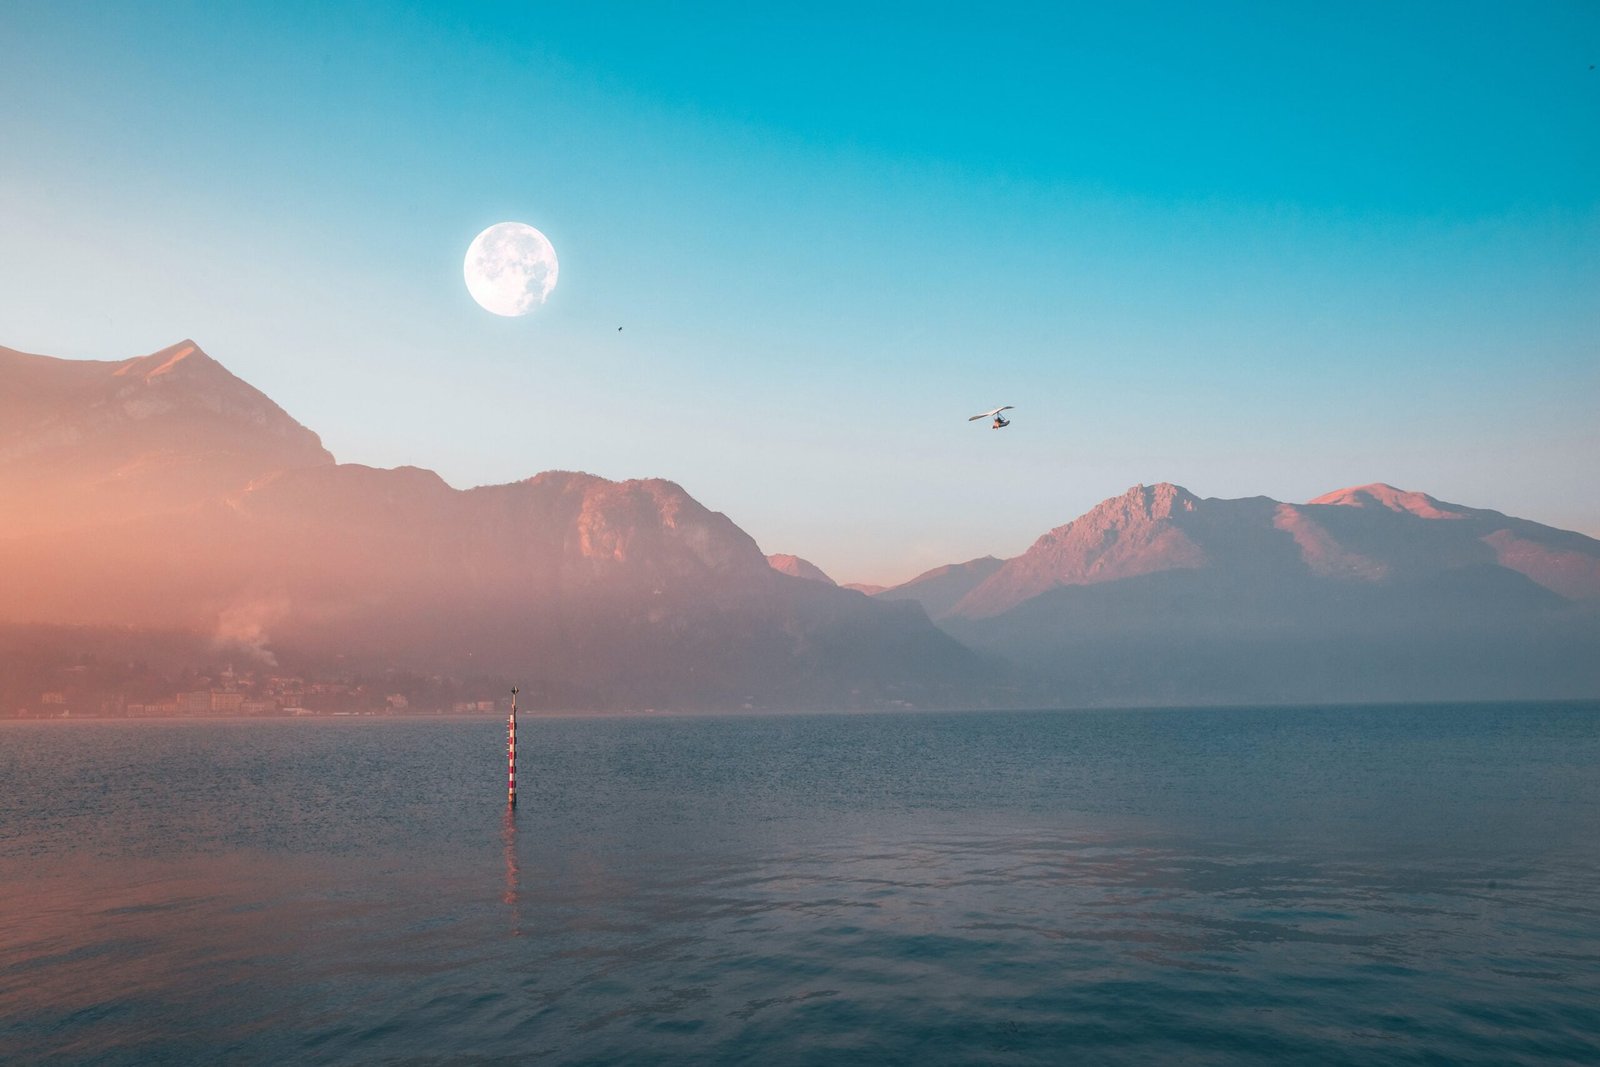 A dreamlike horizon with mountains a moon and someone flying